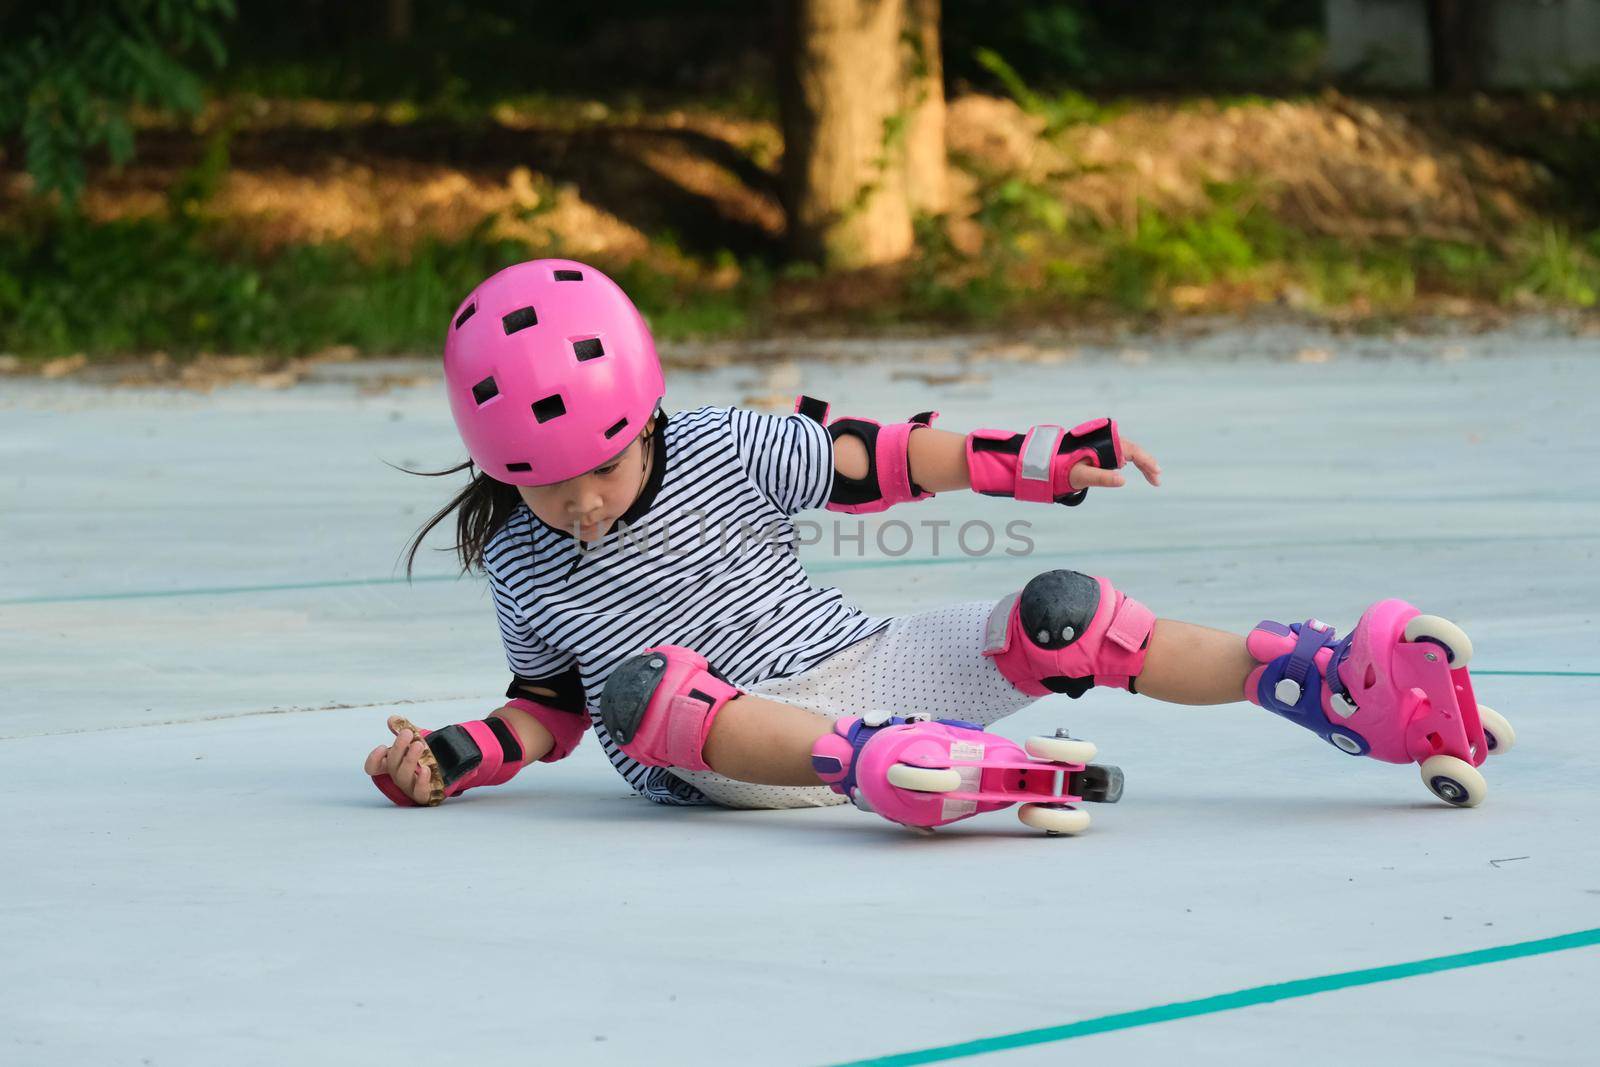 Cute Asian little girl in protective pads and safety helmet practicing roller skating in the park. Exciting outdoor activities for kids. A preschooler wearing roller skates falls down. by TEERASAK